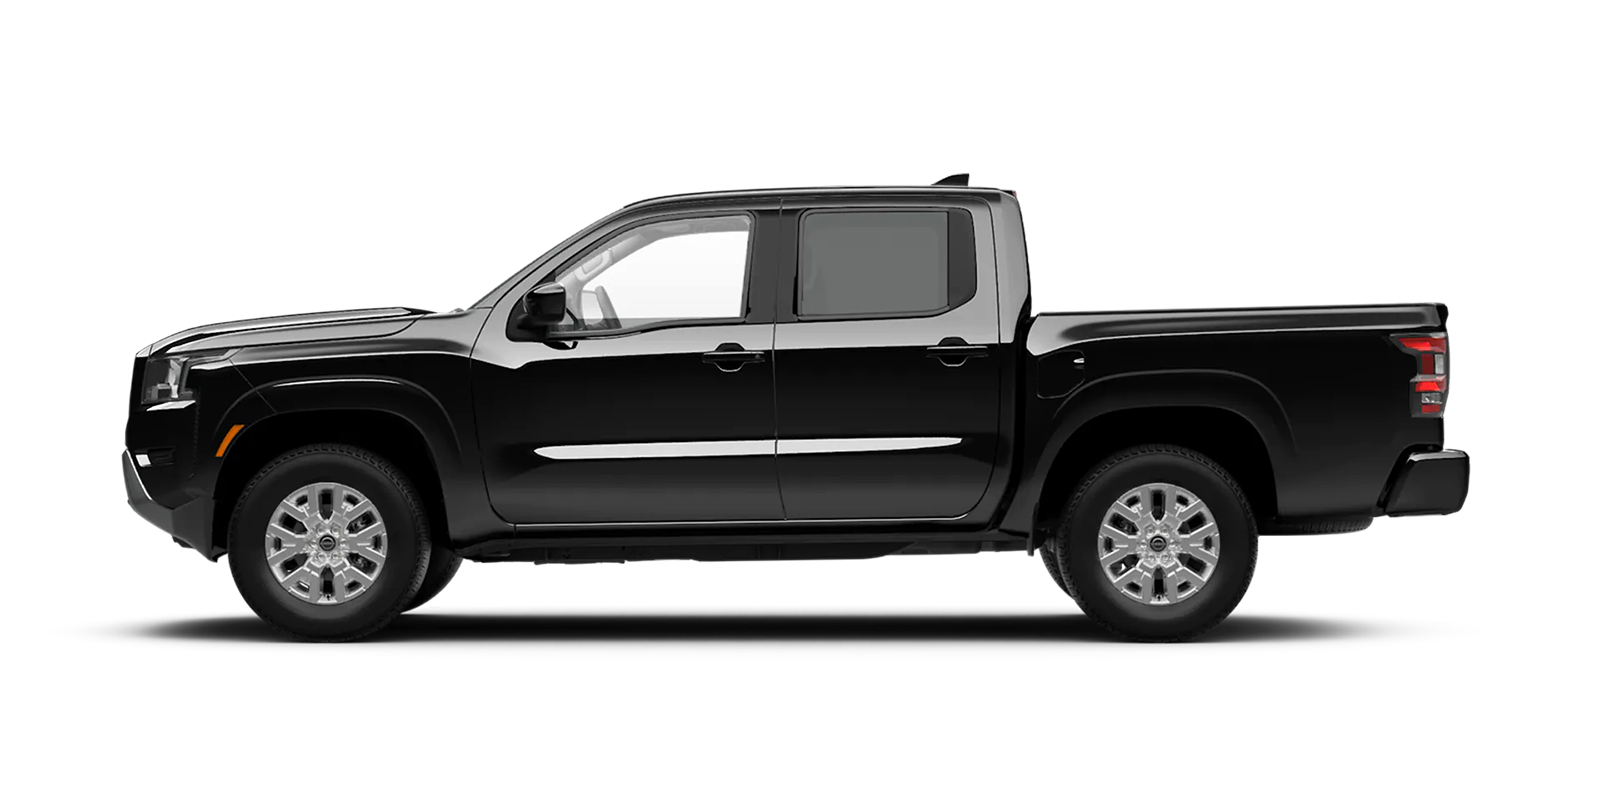 2022 Frontier Crew Cab SV 4x2 in Super Black | Cherokee County Nissan in Holly Springs GA